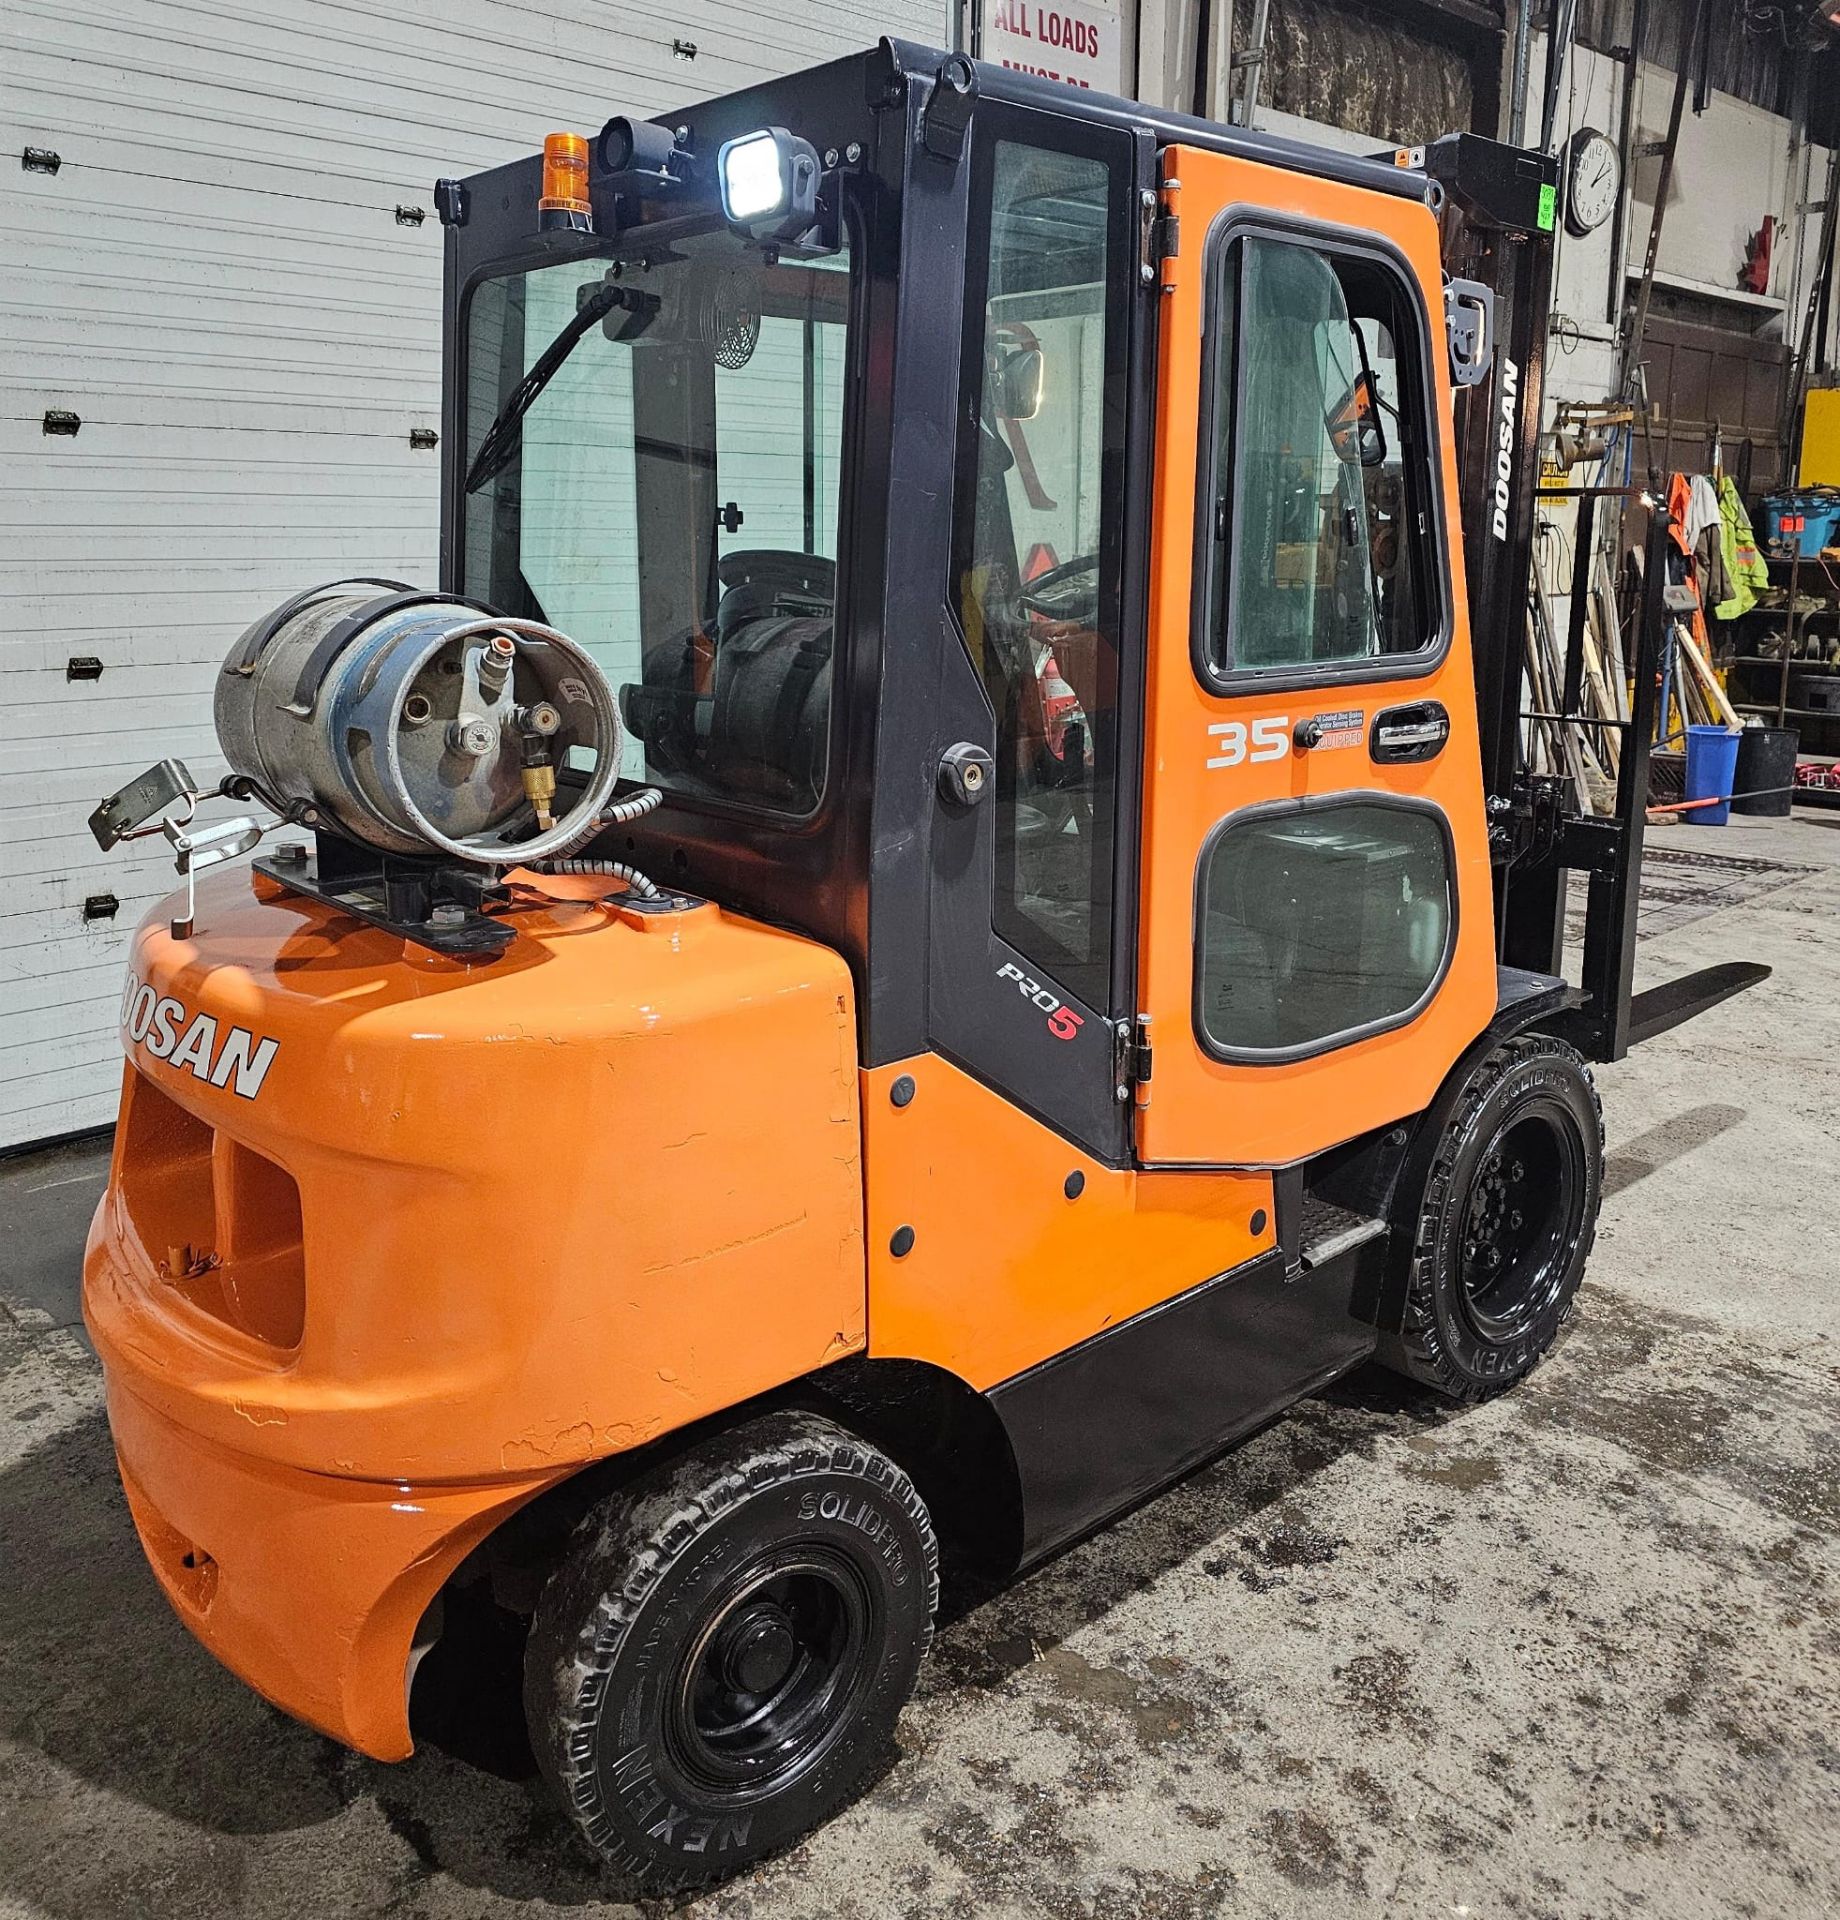 2017 DOOSAN 7,000lbs Capacity OUTDOOR LPG (propane) Forklift with VERY LOW HOURS 3-STAGE 190" LOAD - Image 5 of 17